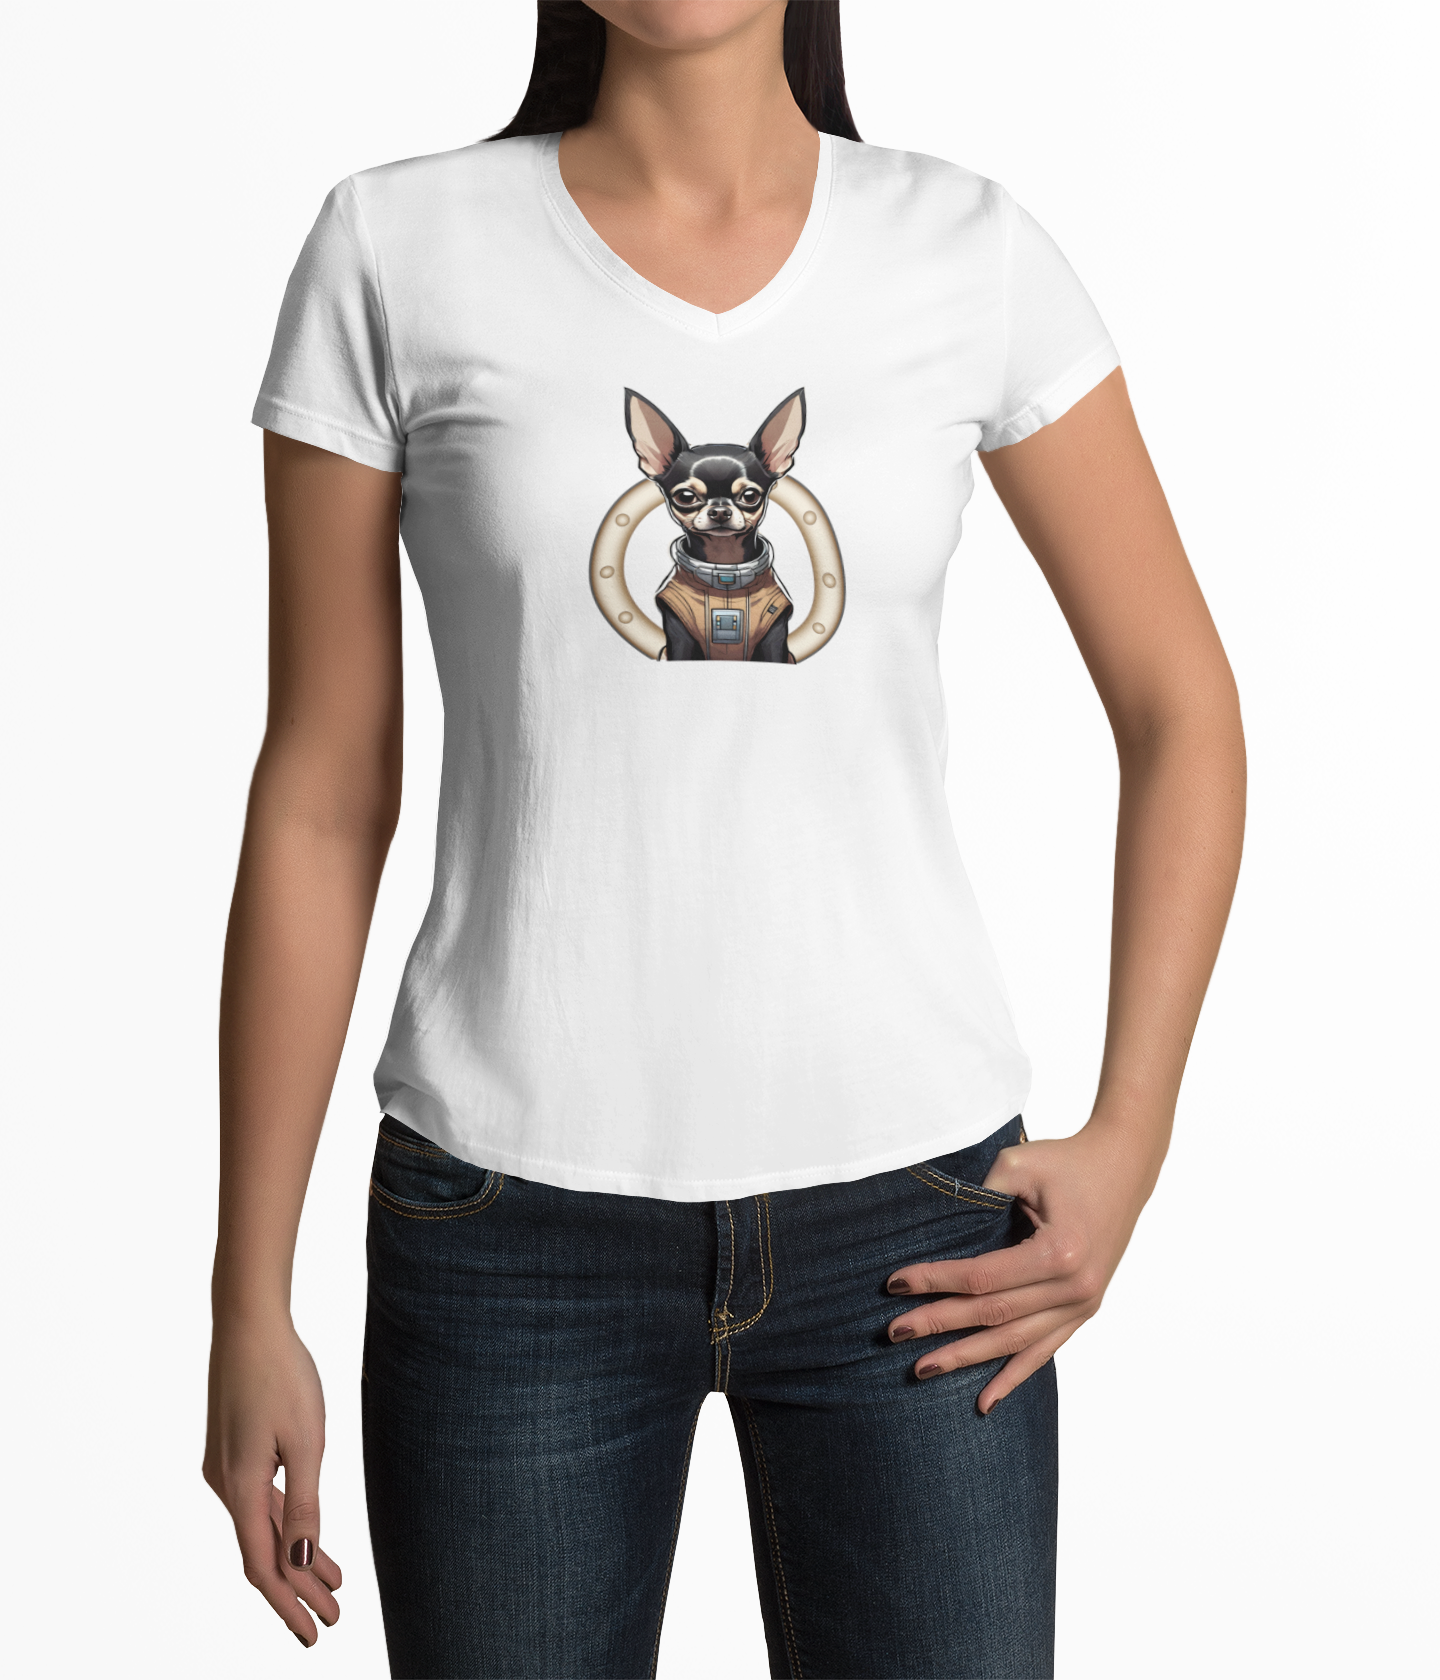 Unisex Jersey Short Sleeve V-Neck Tee with Cute Chihuahua Astronaut Design - Mockup Woman